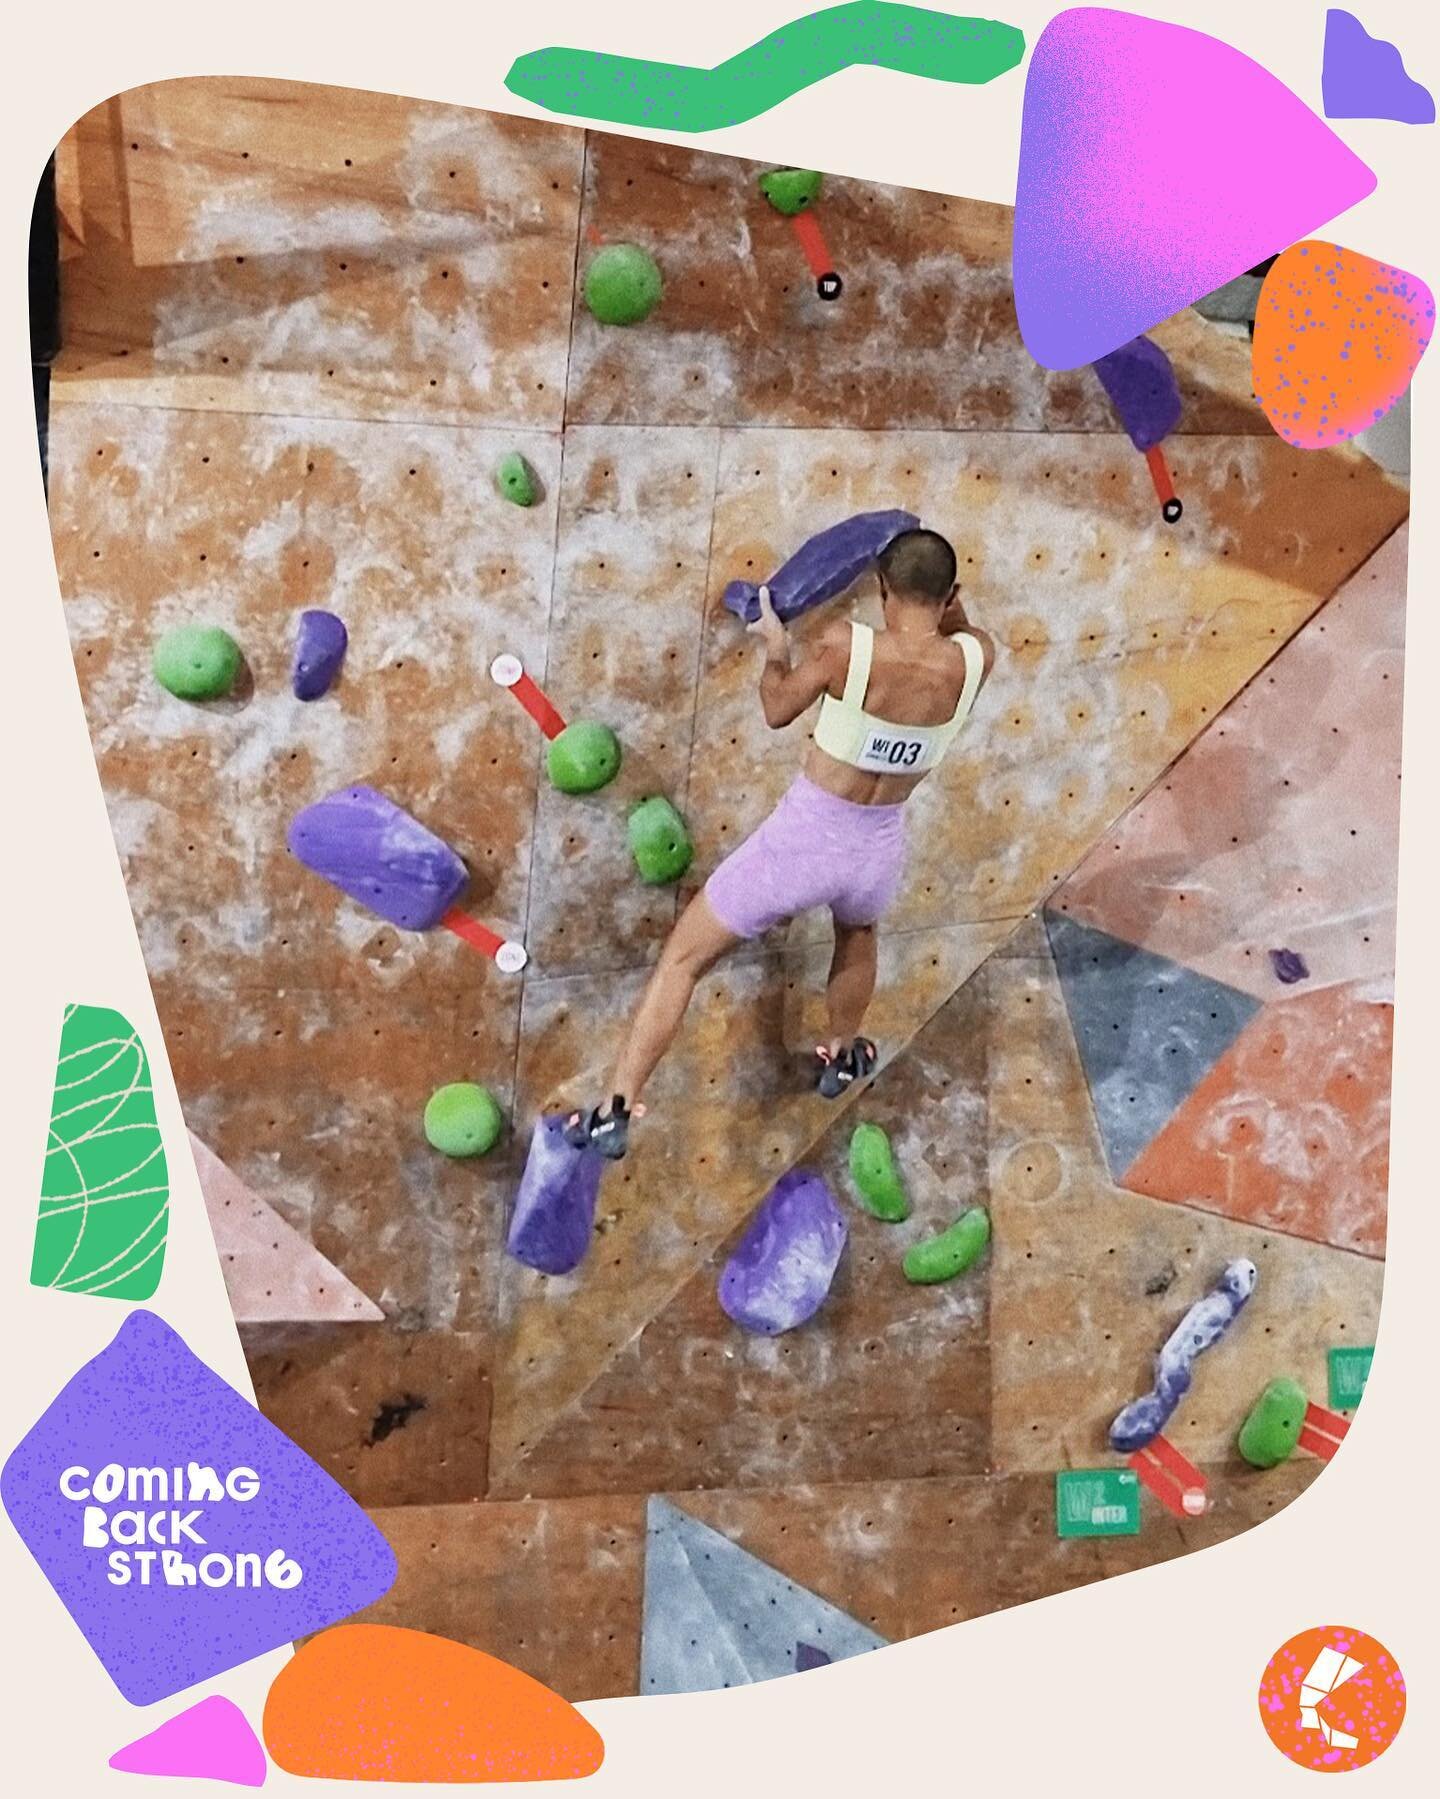 the best projects are the ones you do for things you really enjoy&mdash;and this is def one of them for me! 💟

thank u thank u @climbcentralmanila for inviting me to work with you on this v special event 🥹 obvs i had a lot of fun designing the mate